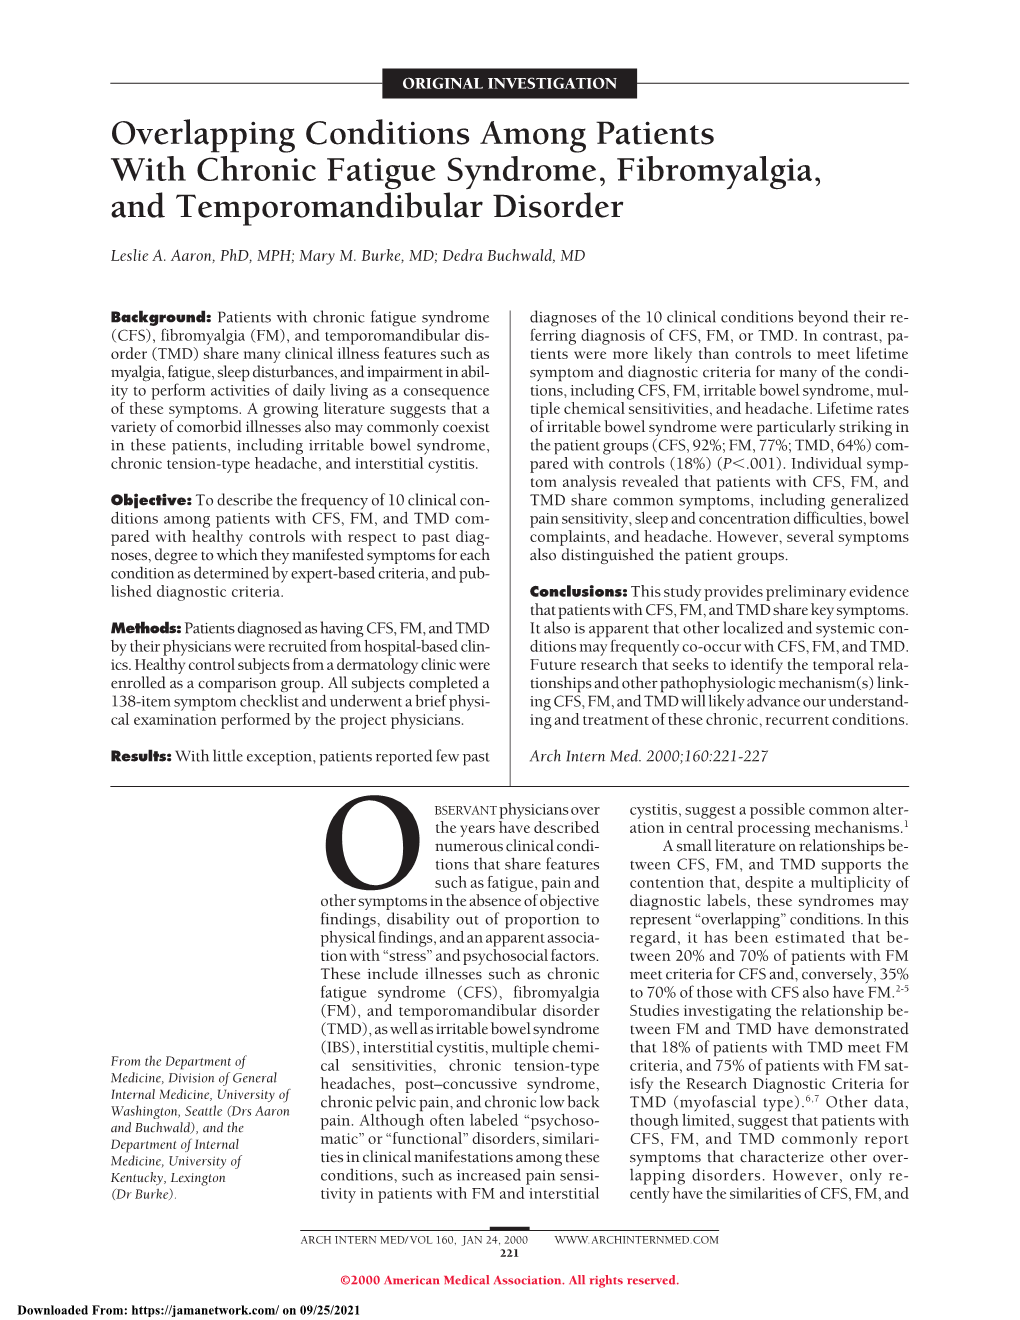 Overlapping Conditions Among Patients with Chronic Fatigue Syndrome, Fibromyalgia, and Temporomandibular Disorder